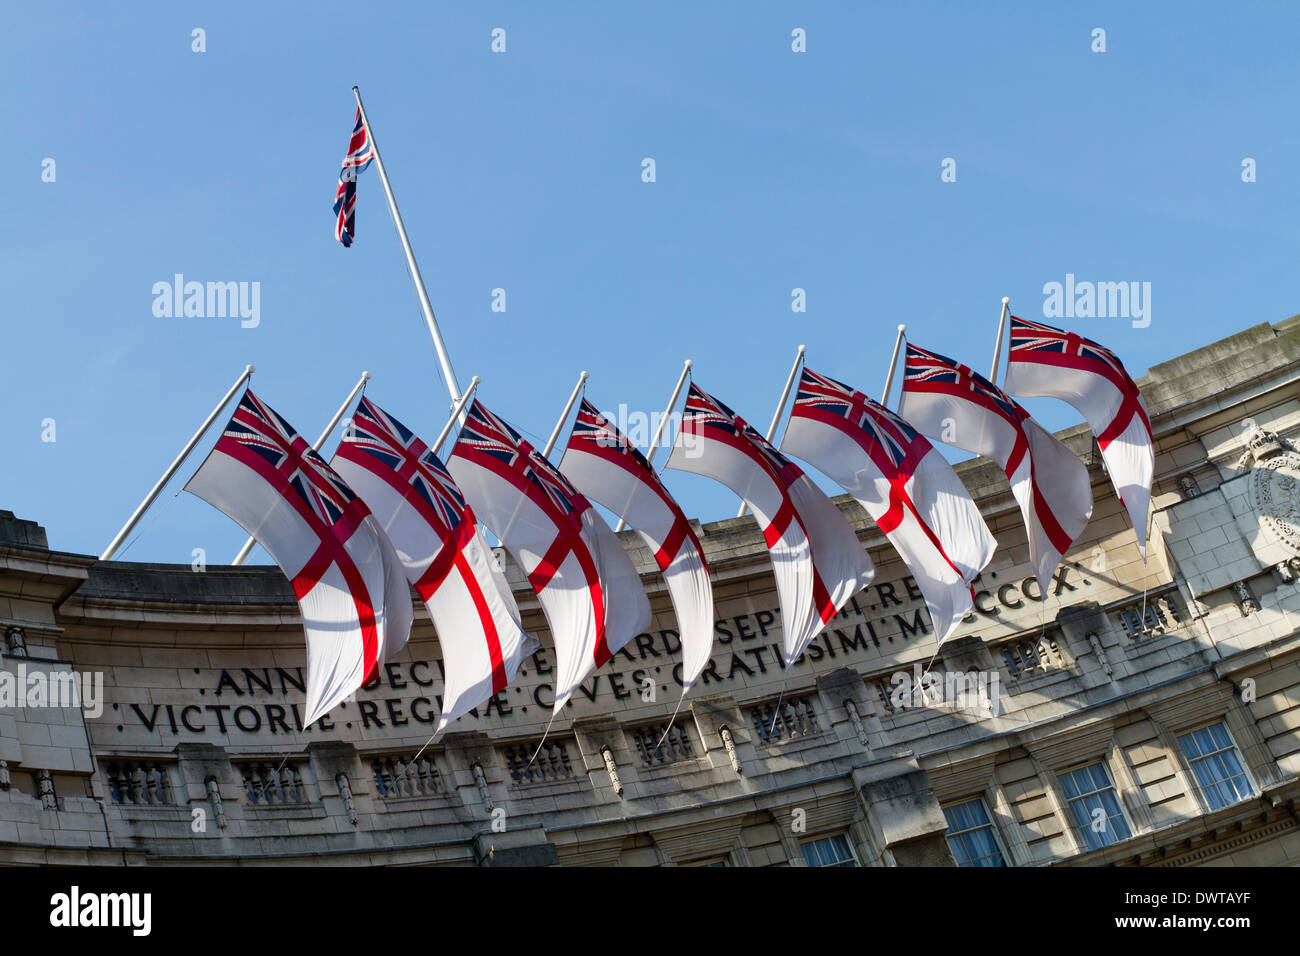 Royal Navy White Ensign flags flying on Admiralty Arch, London Stock Photo